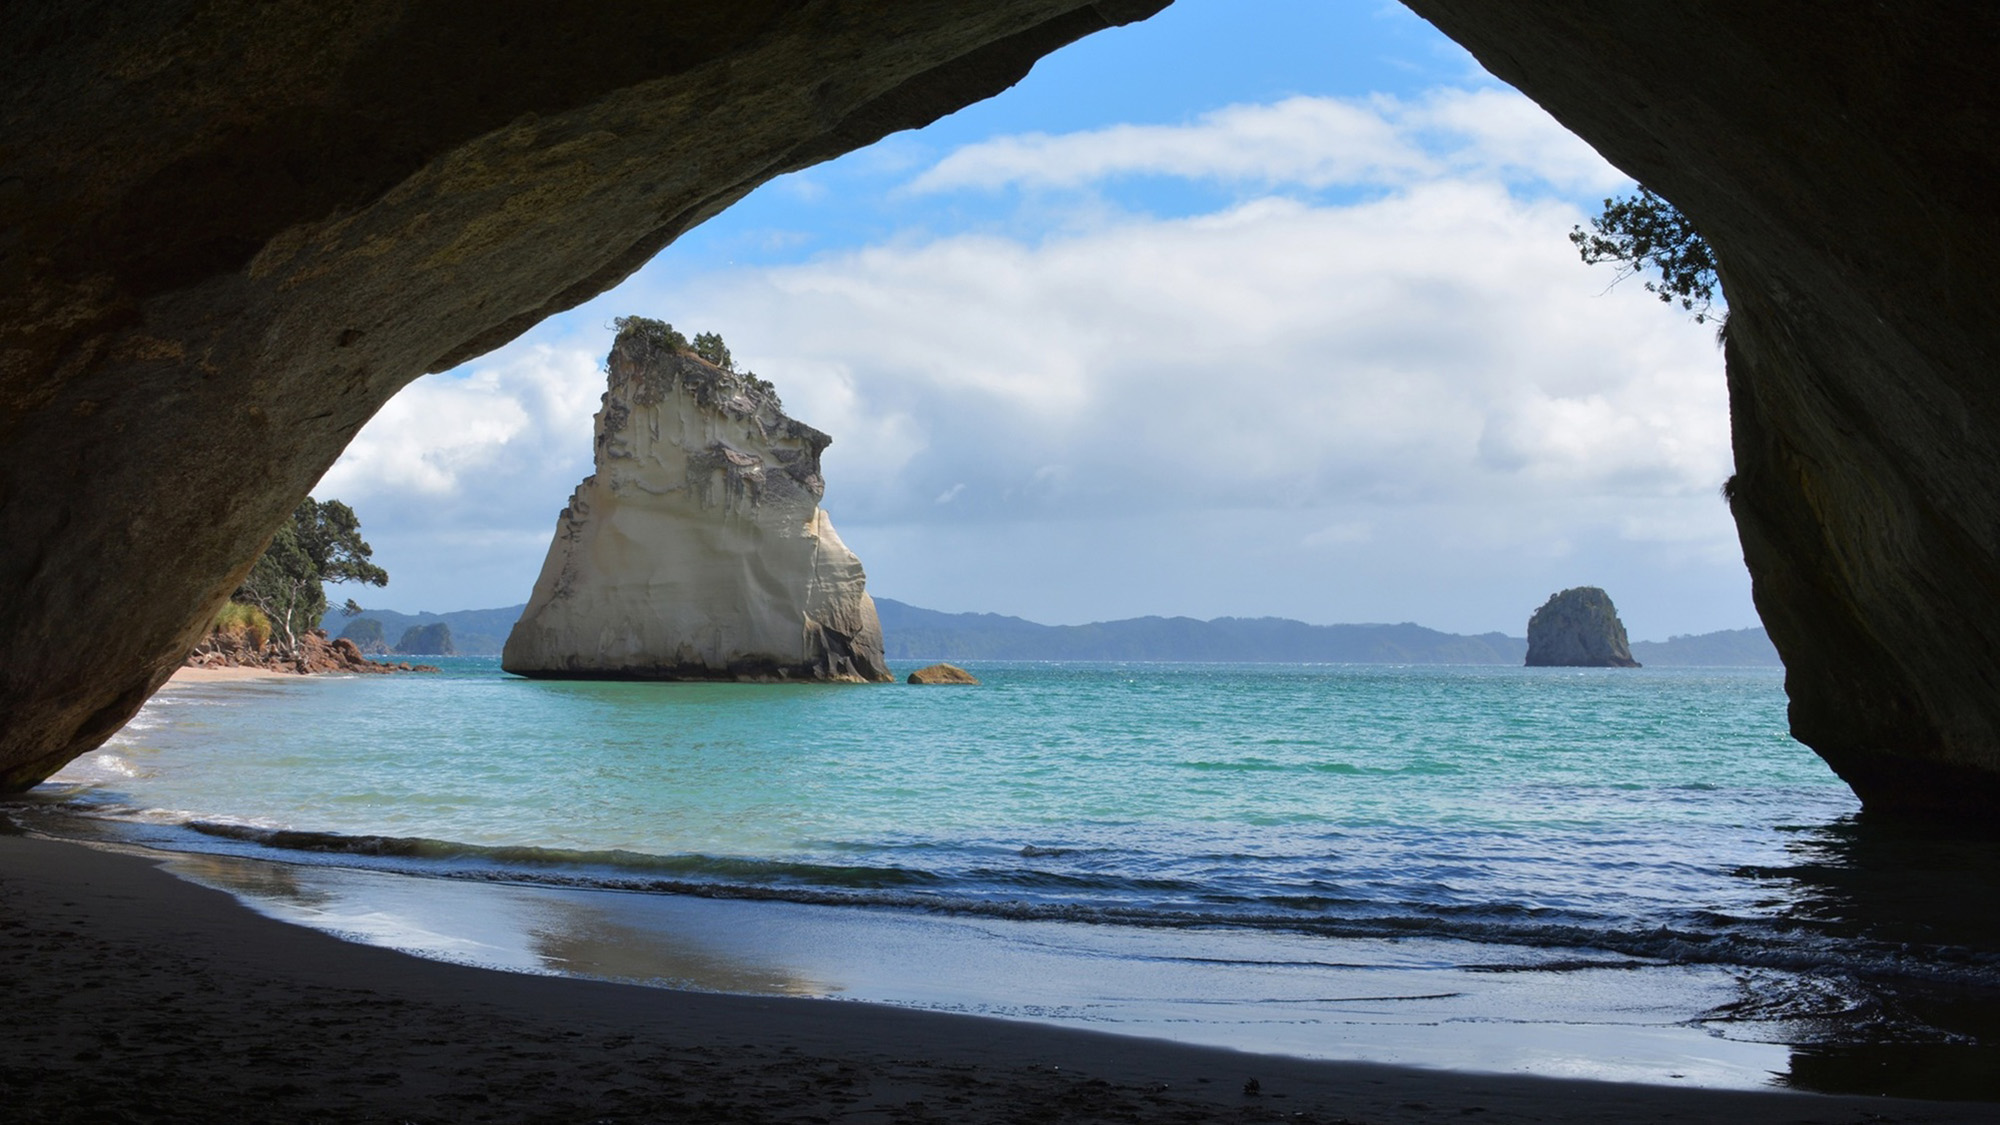 nz2-Devoyager-P-Cathedral Cove17